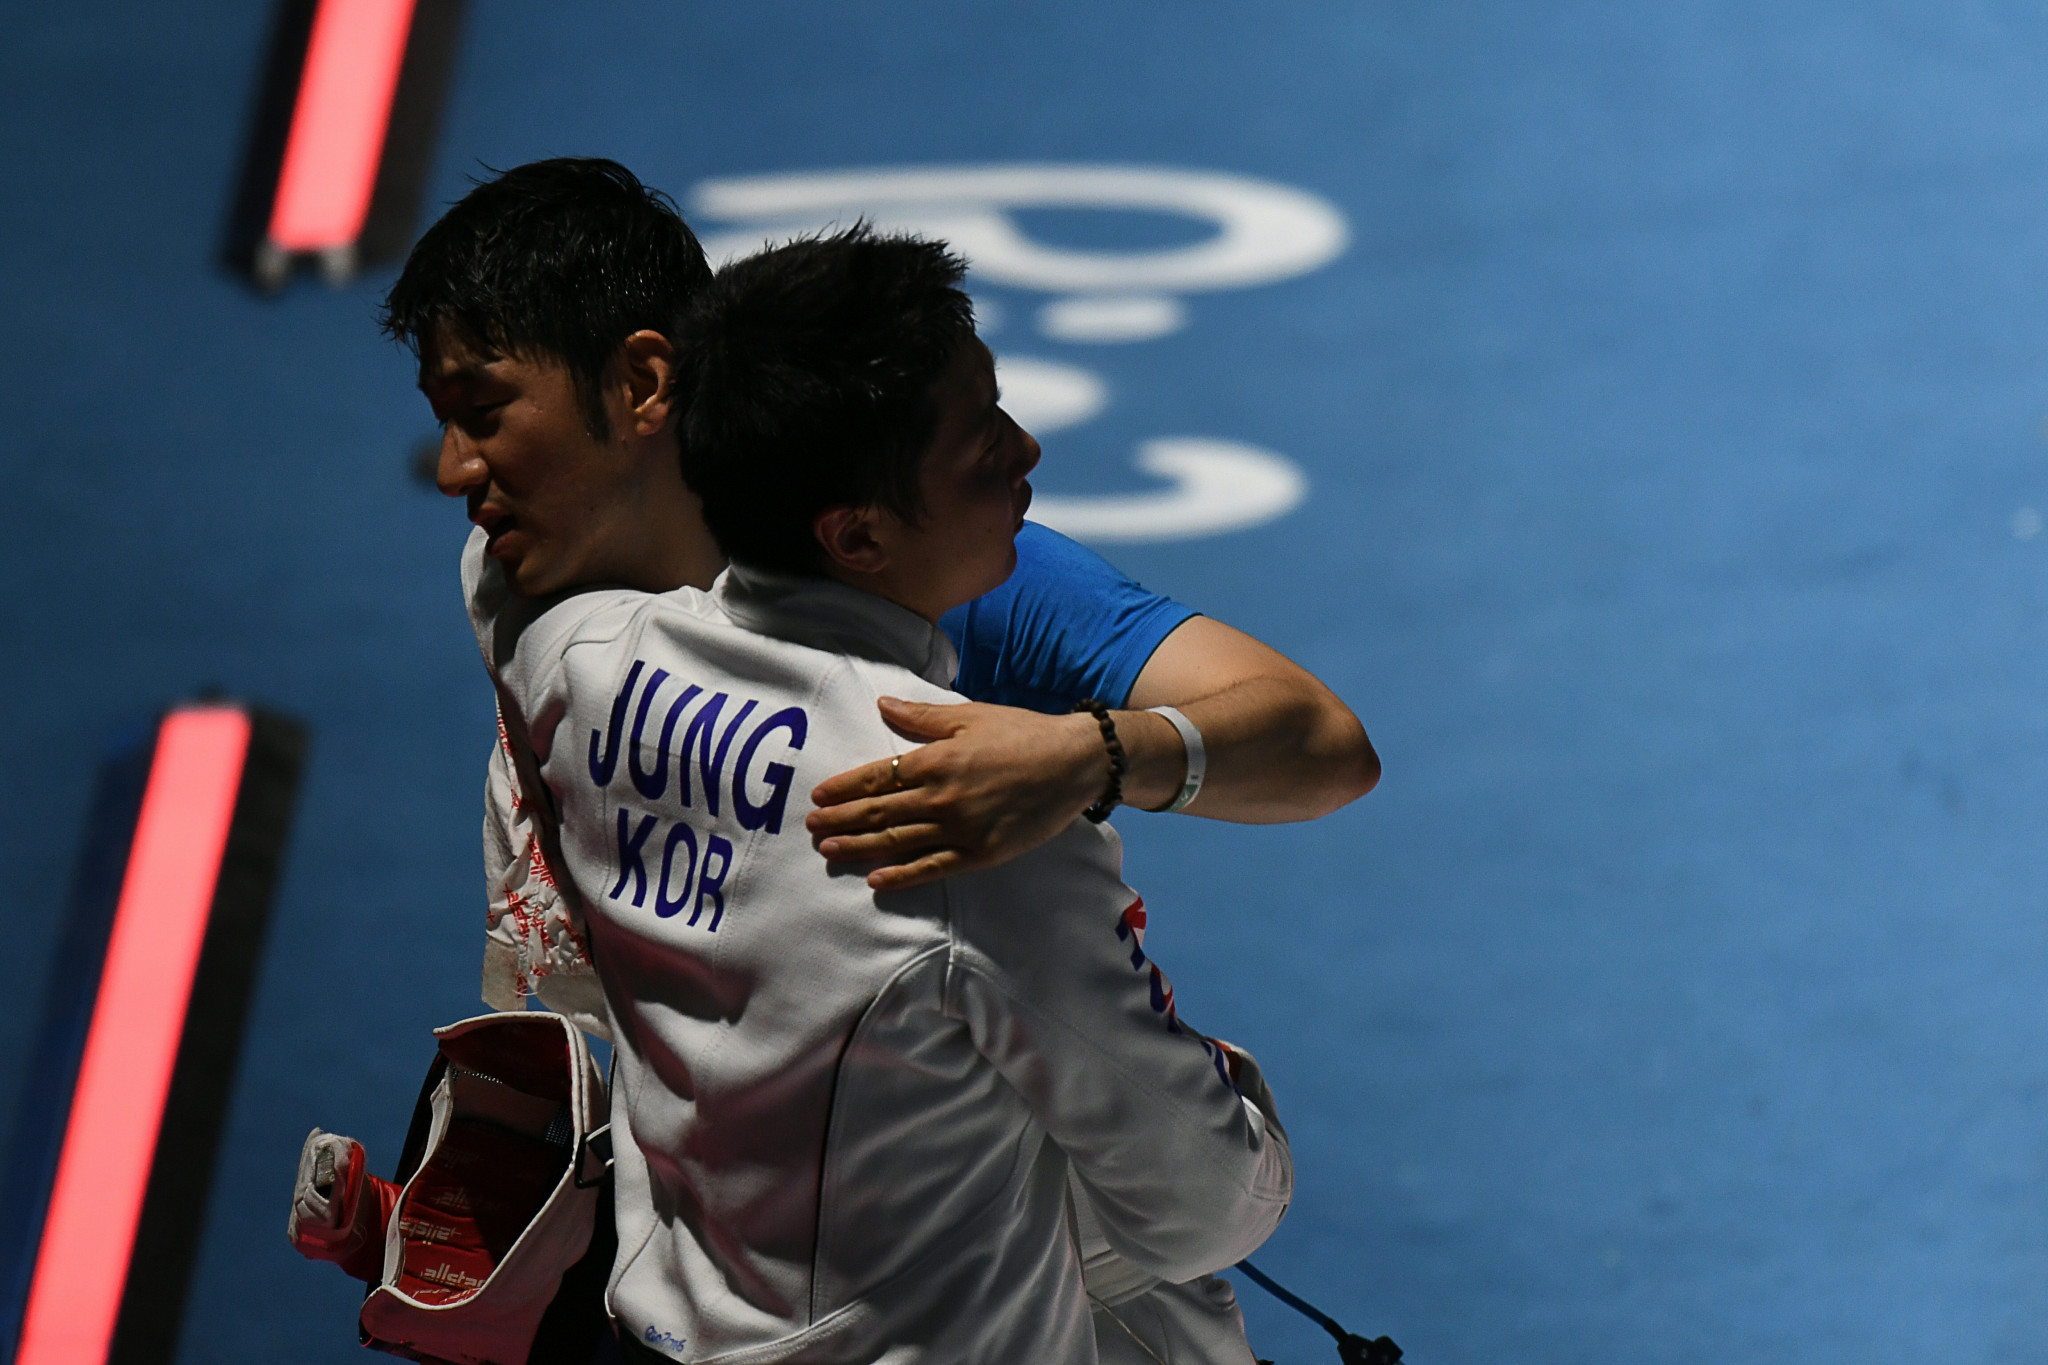 Jinsun Jung wins gold in men's epee at Asian Fencing Championships after taking bronze last year